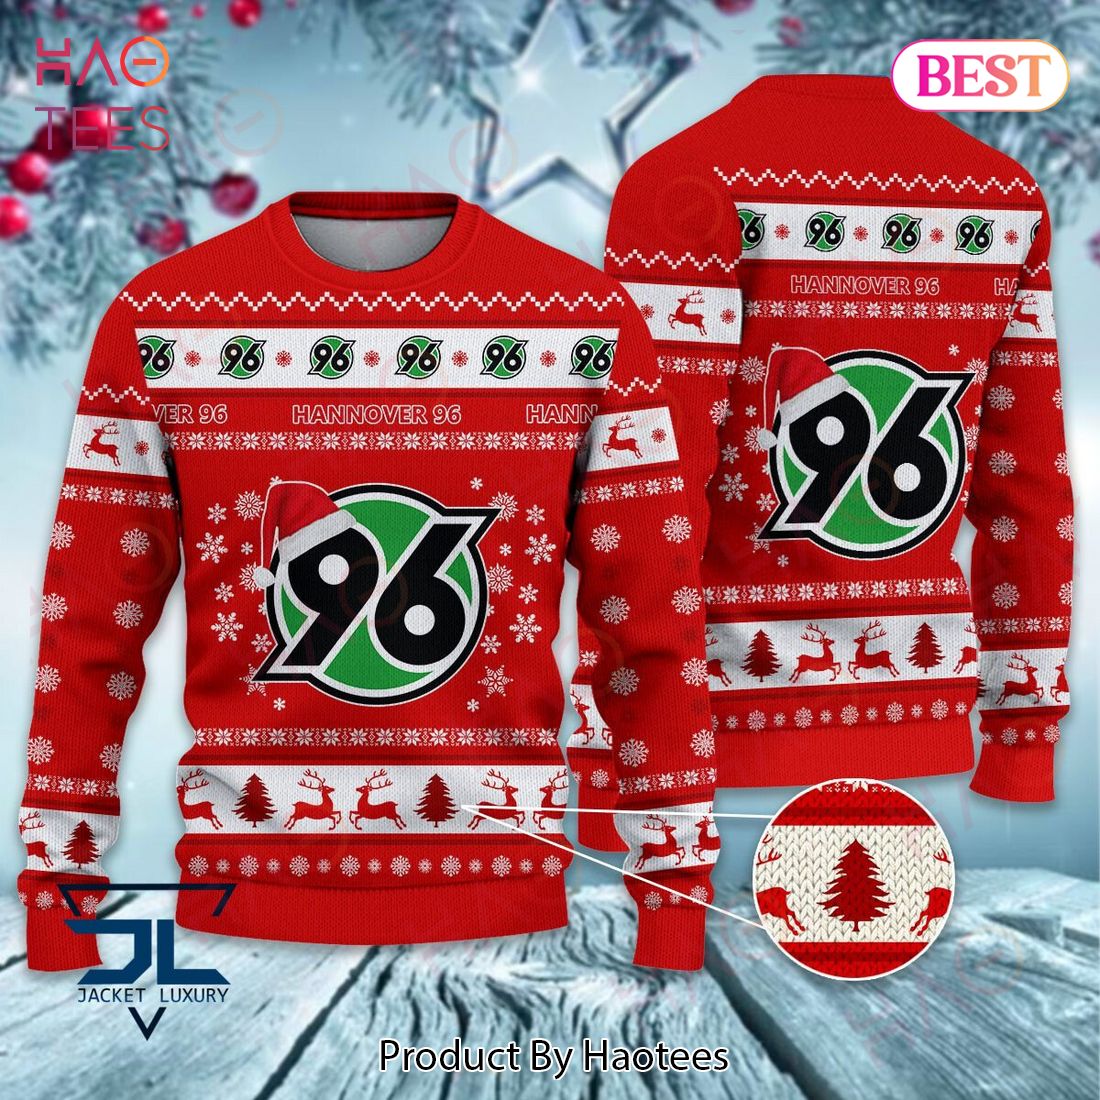 Hannover 96 Christmas Luxury Brand Sweater Limited Edition